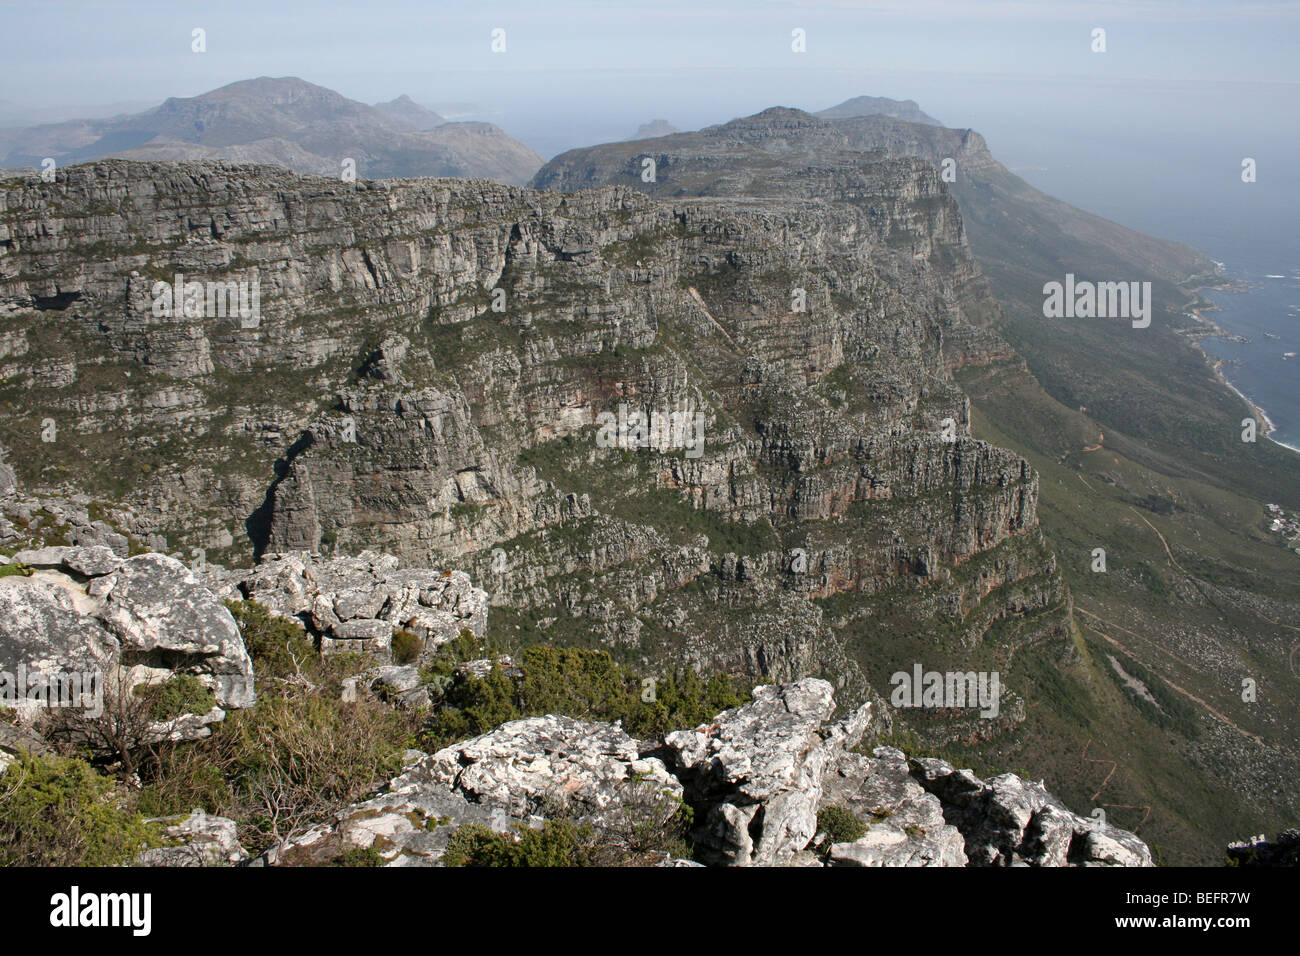 View From The Summit Of Table Mountain, Cape Town, South Africa Stock Photo